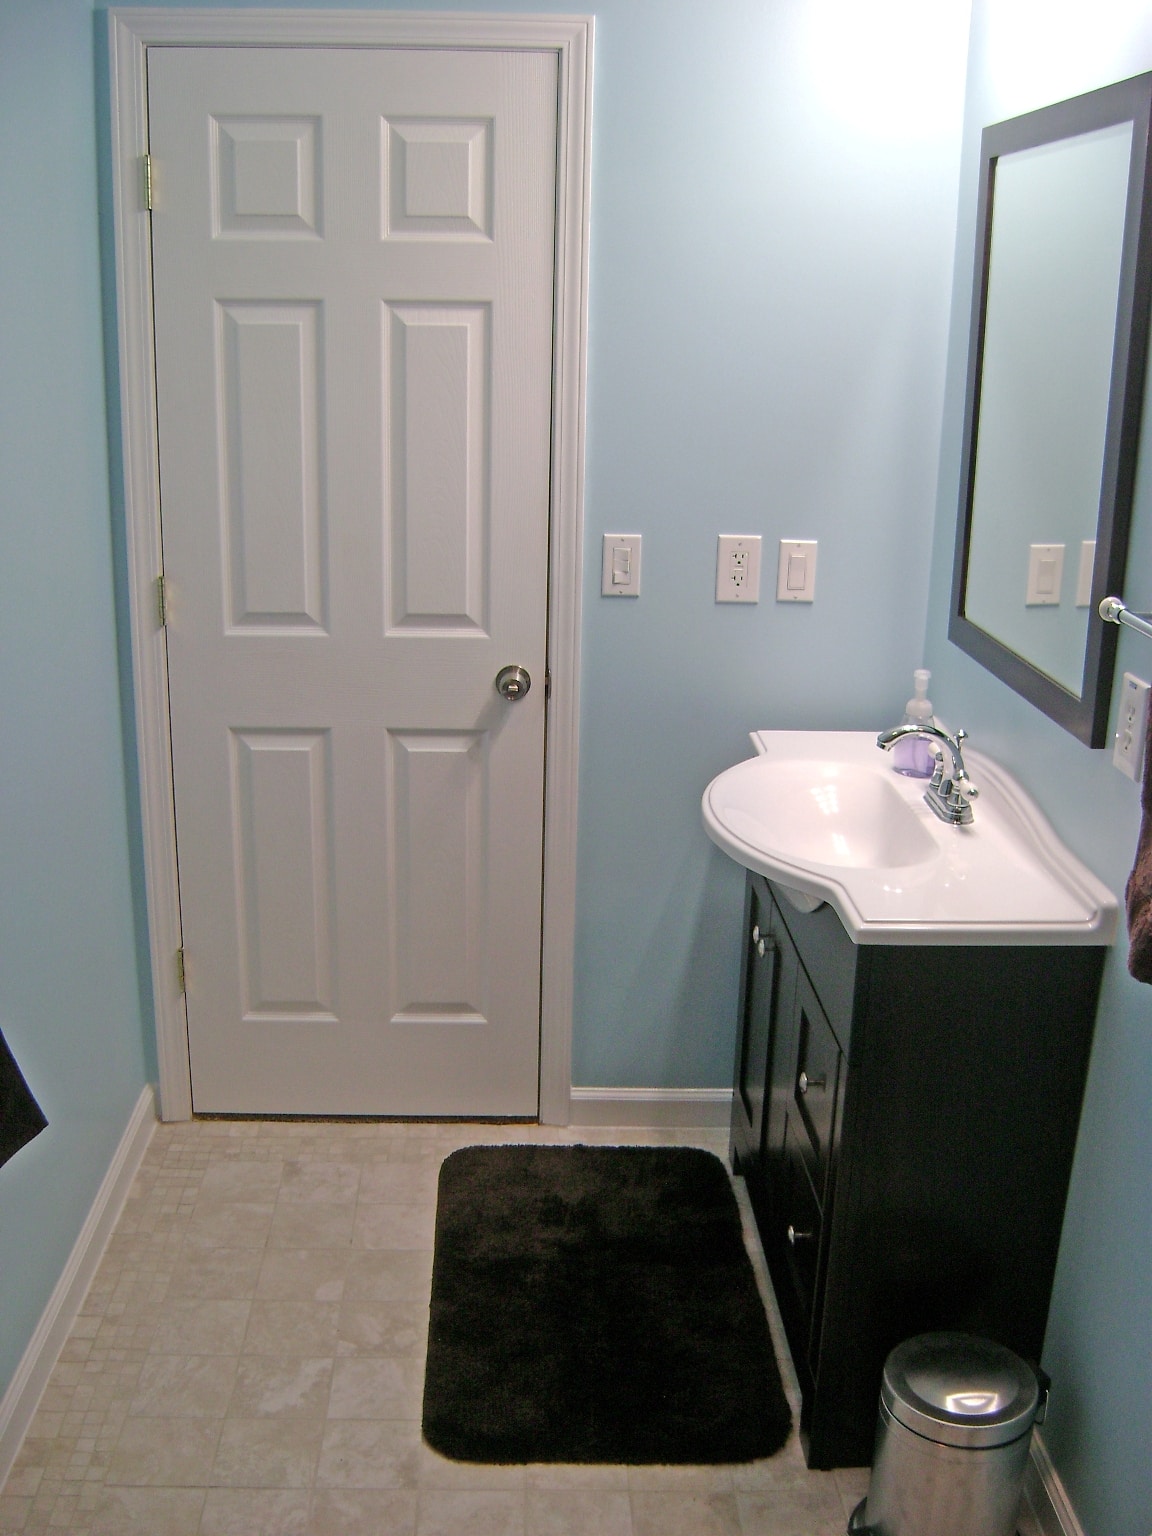 How to Finish a Basement Bathroom - The Complete Series  Finished Basement Bathroom Vanity